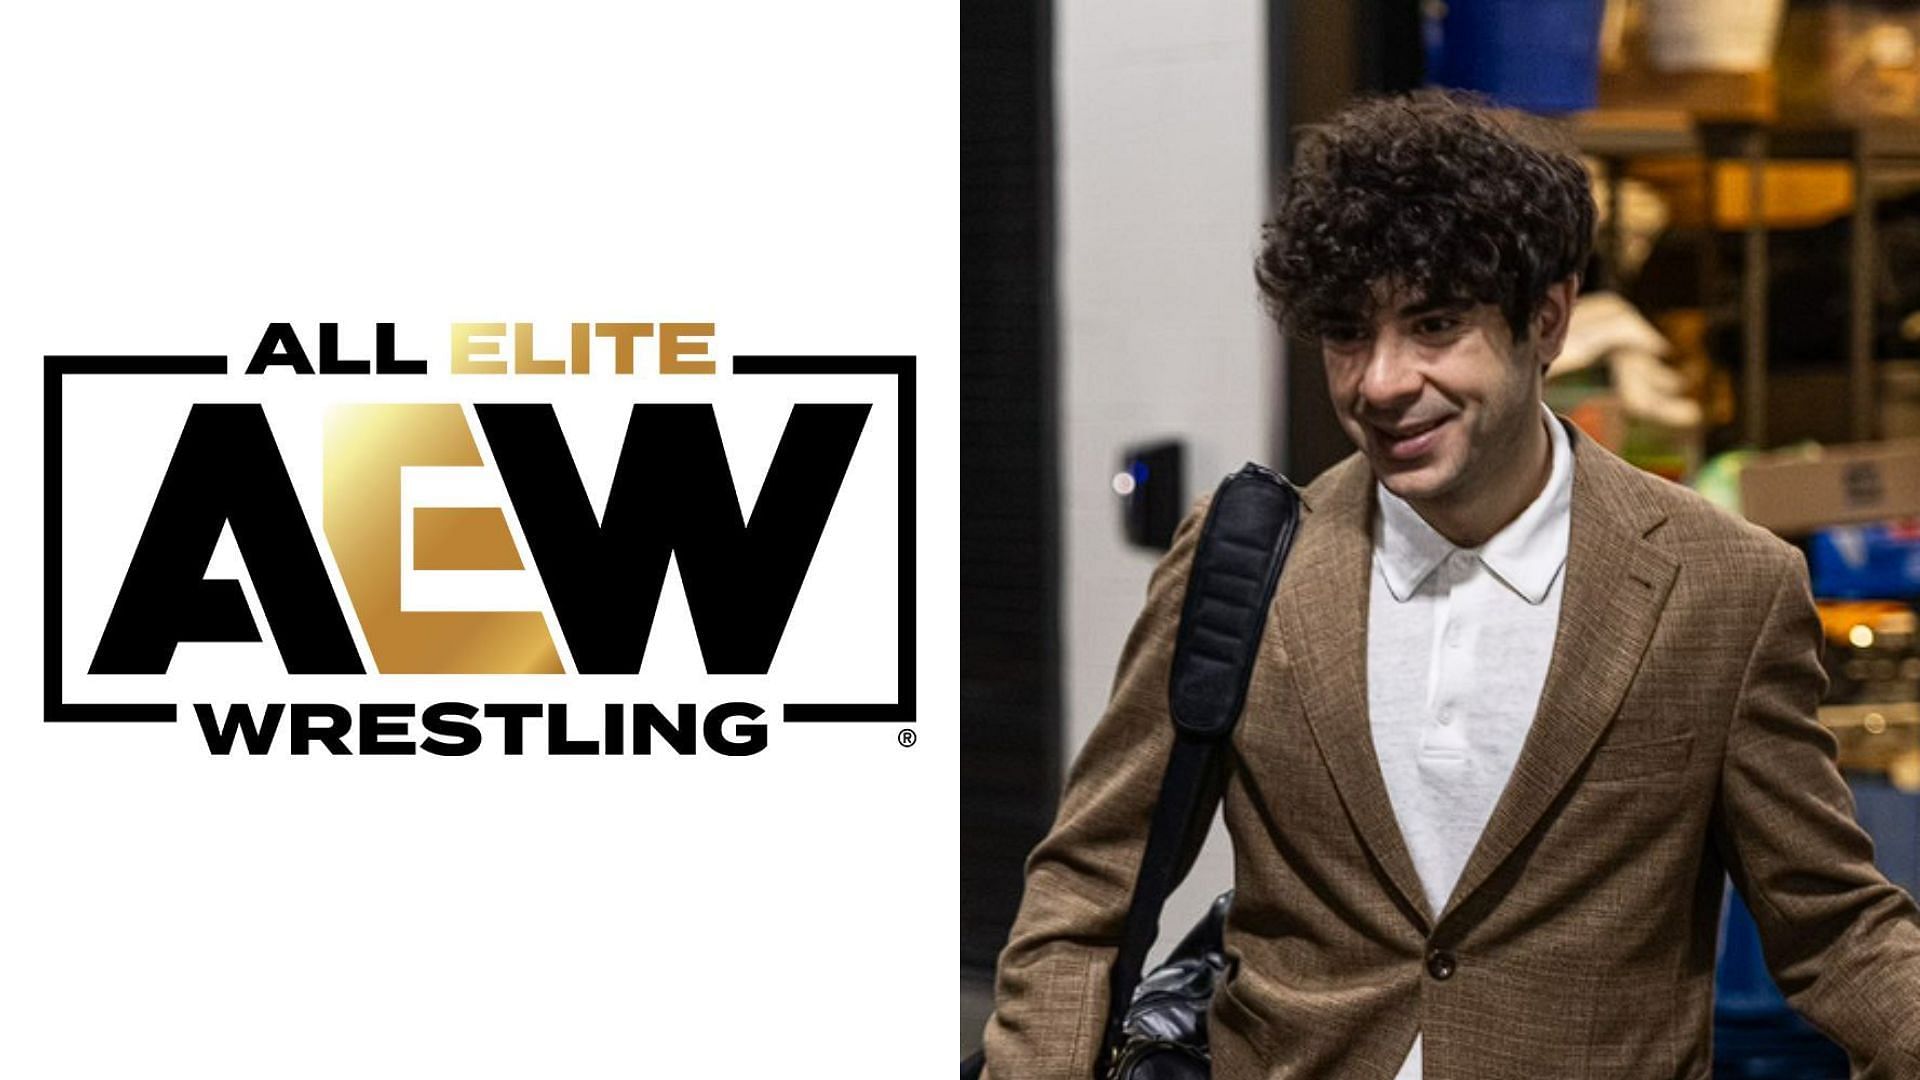 Tony Khan is the president of All Elite Wrestling [Photos courtesy of AEW and Tony Khan